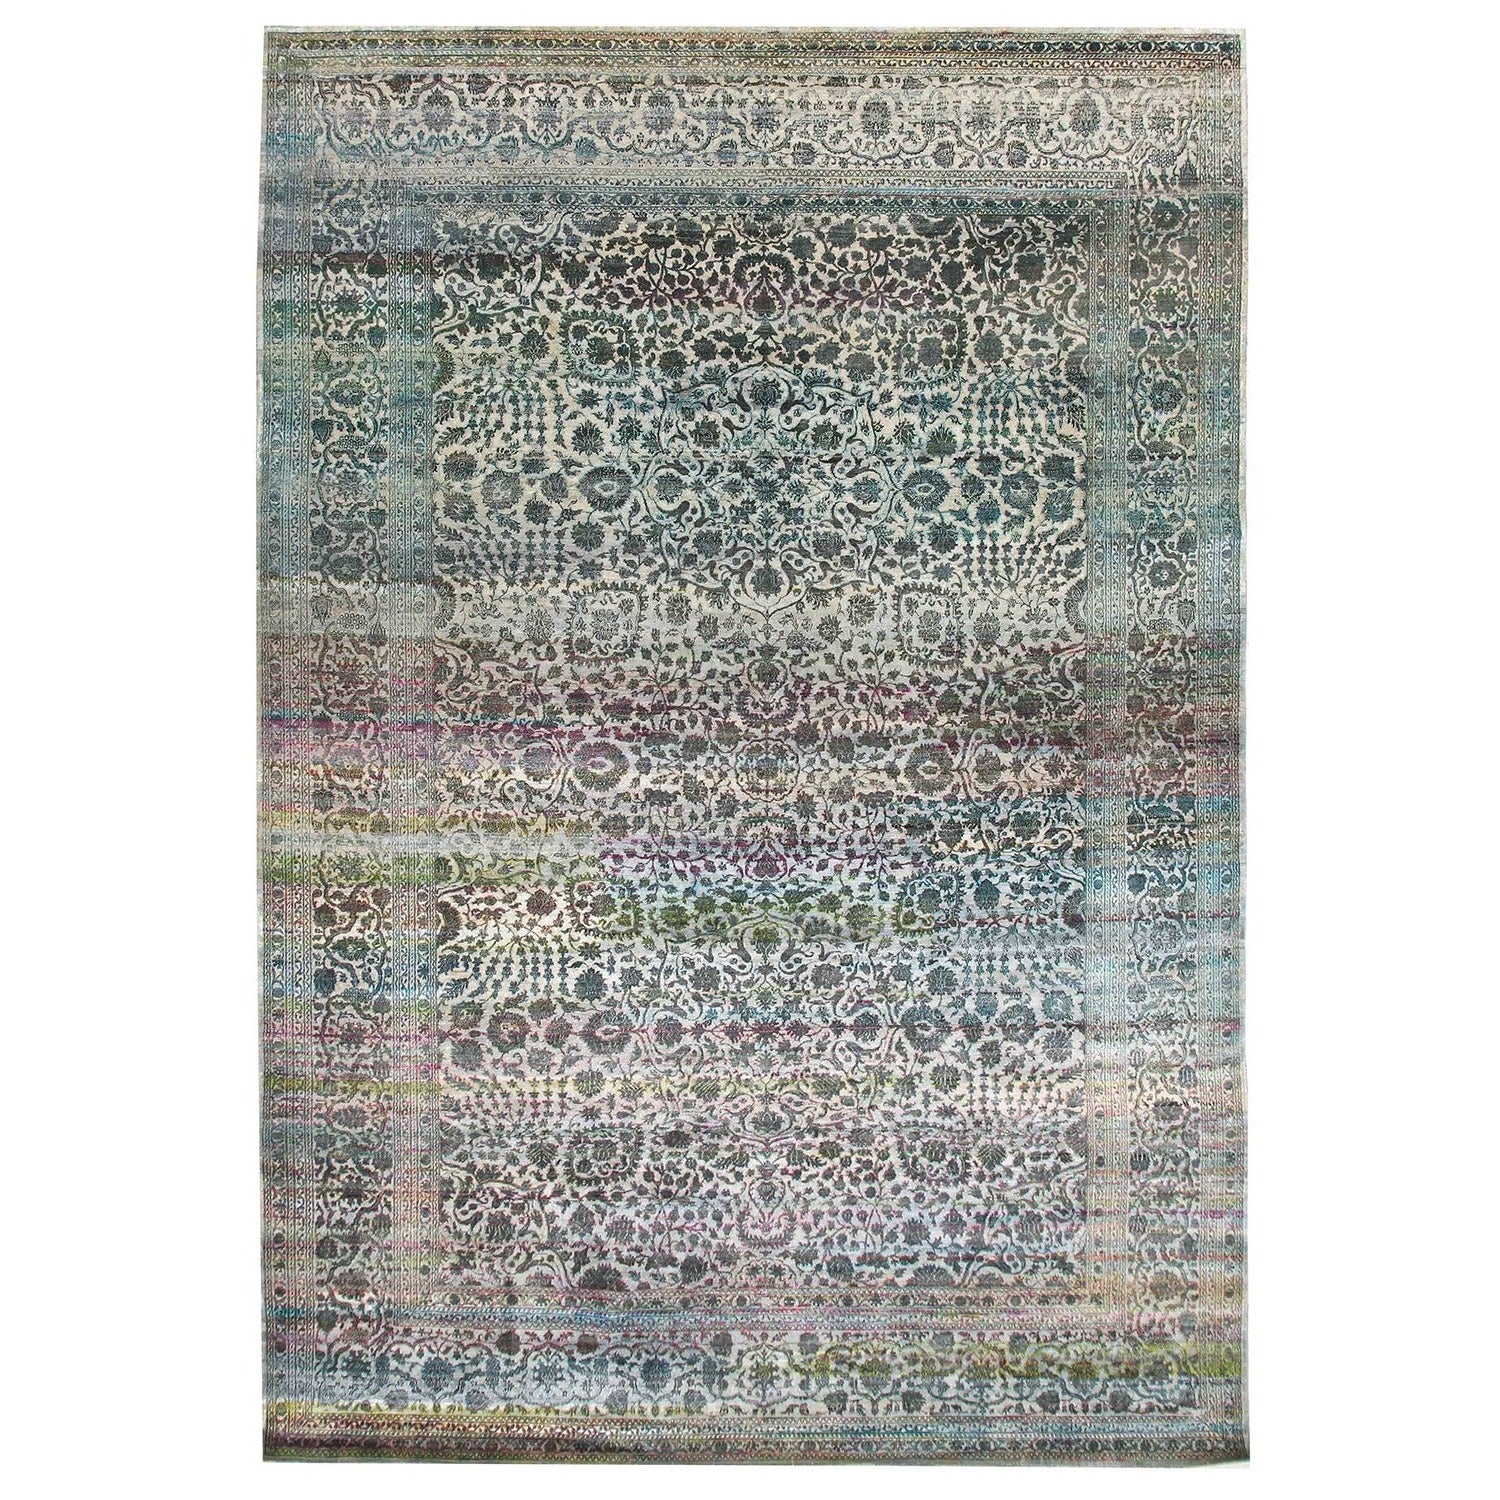 Intricate and vintage-looking area rug with diverse color palette.